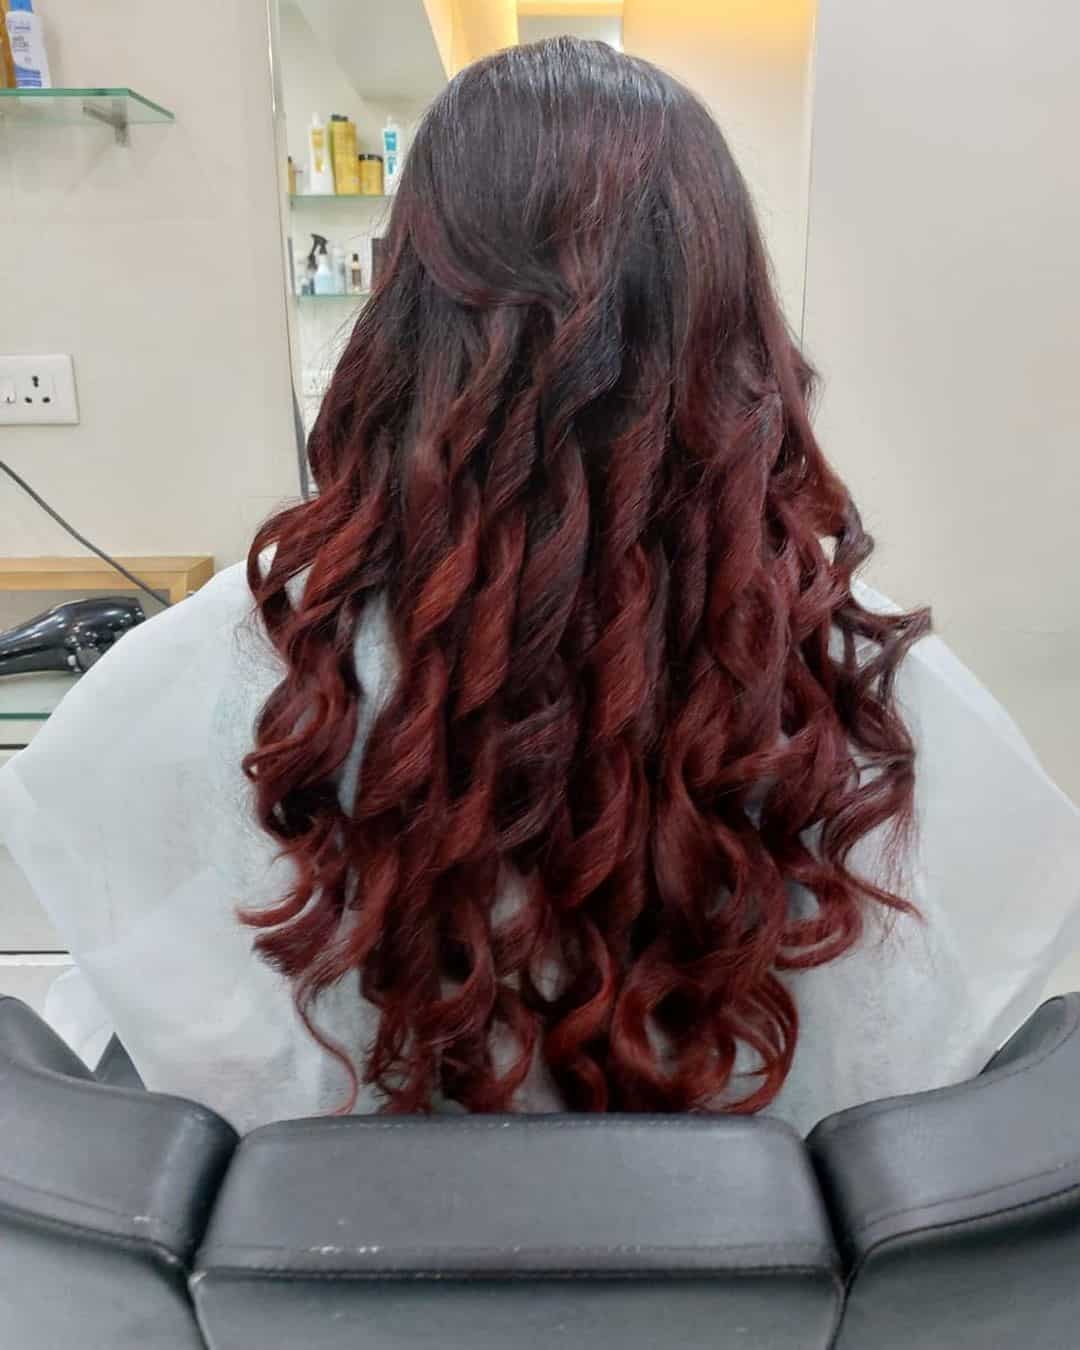 Curled Up Red Highlights On Black Hair Formal Look